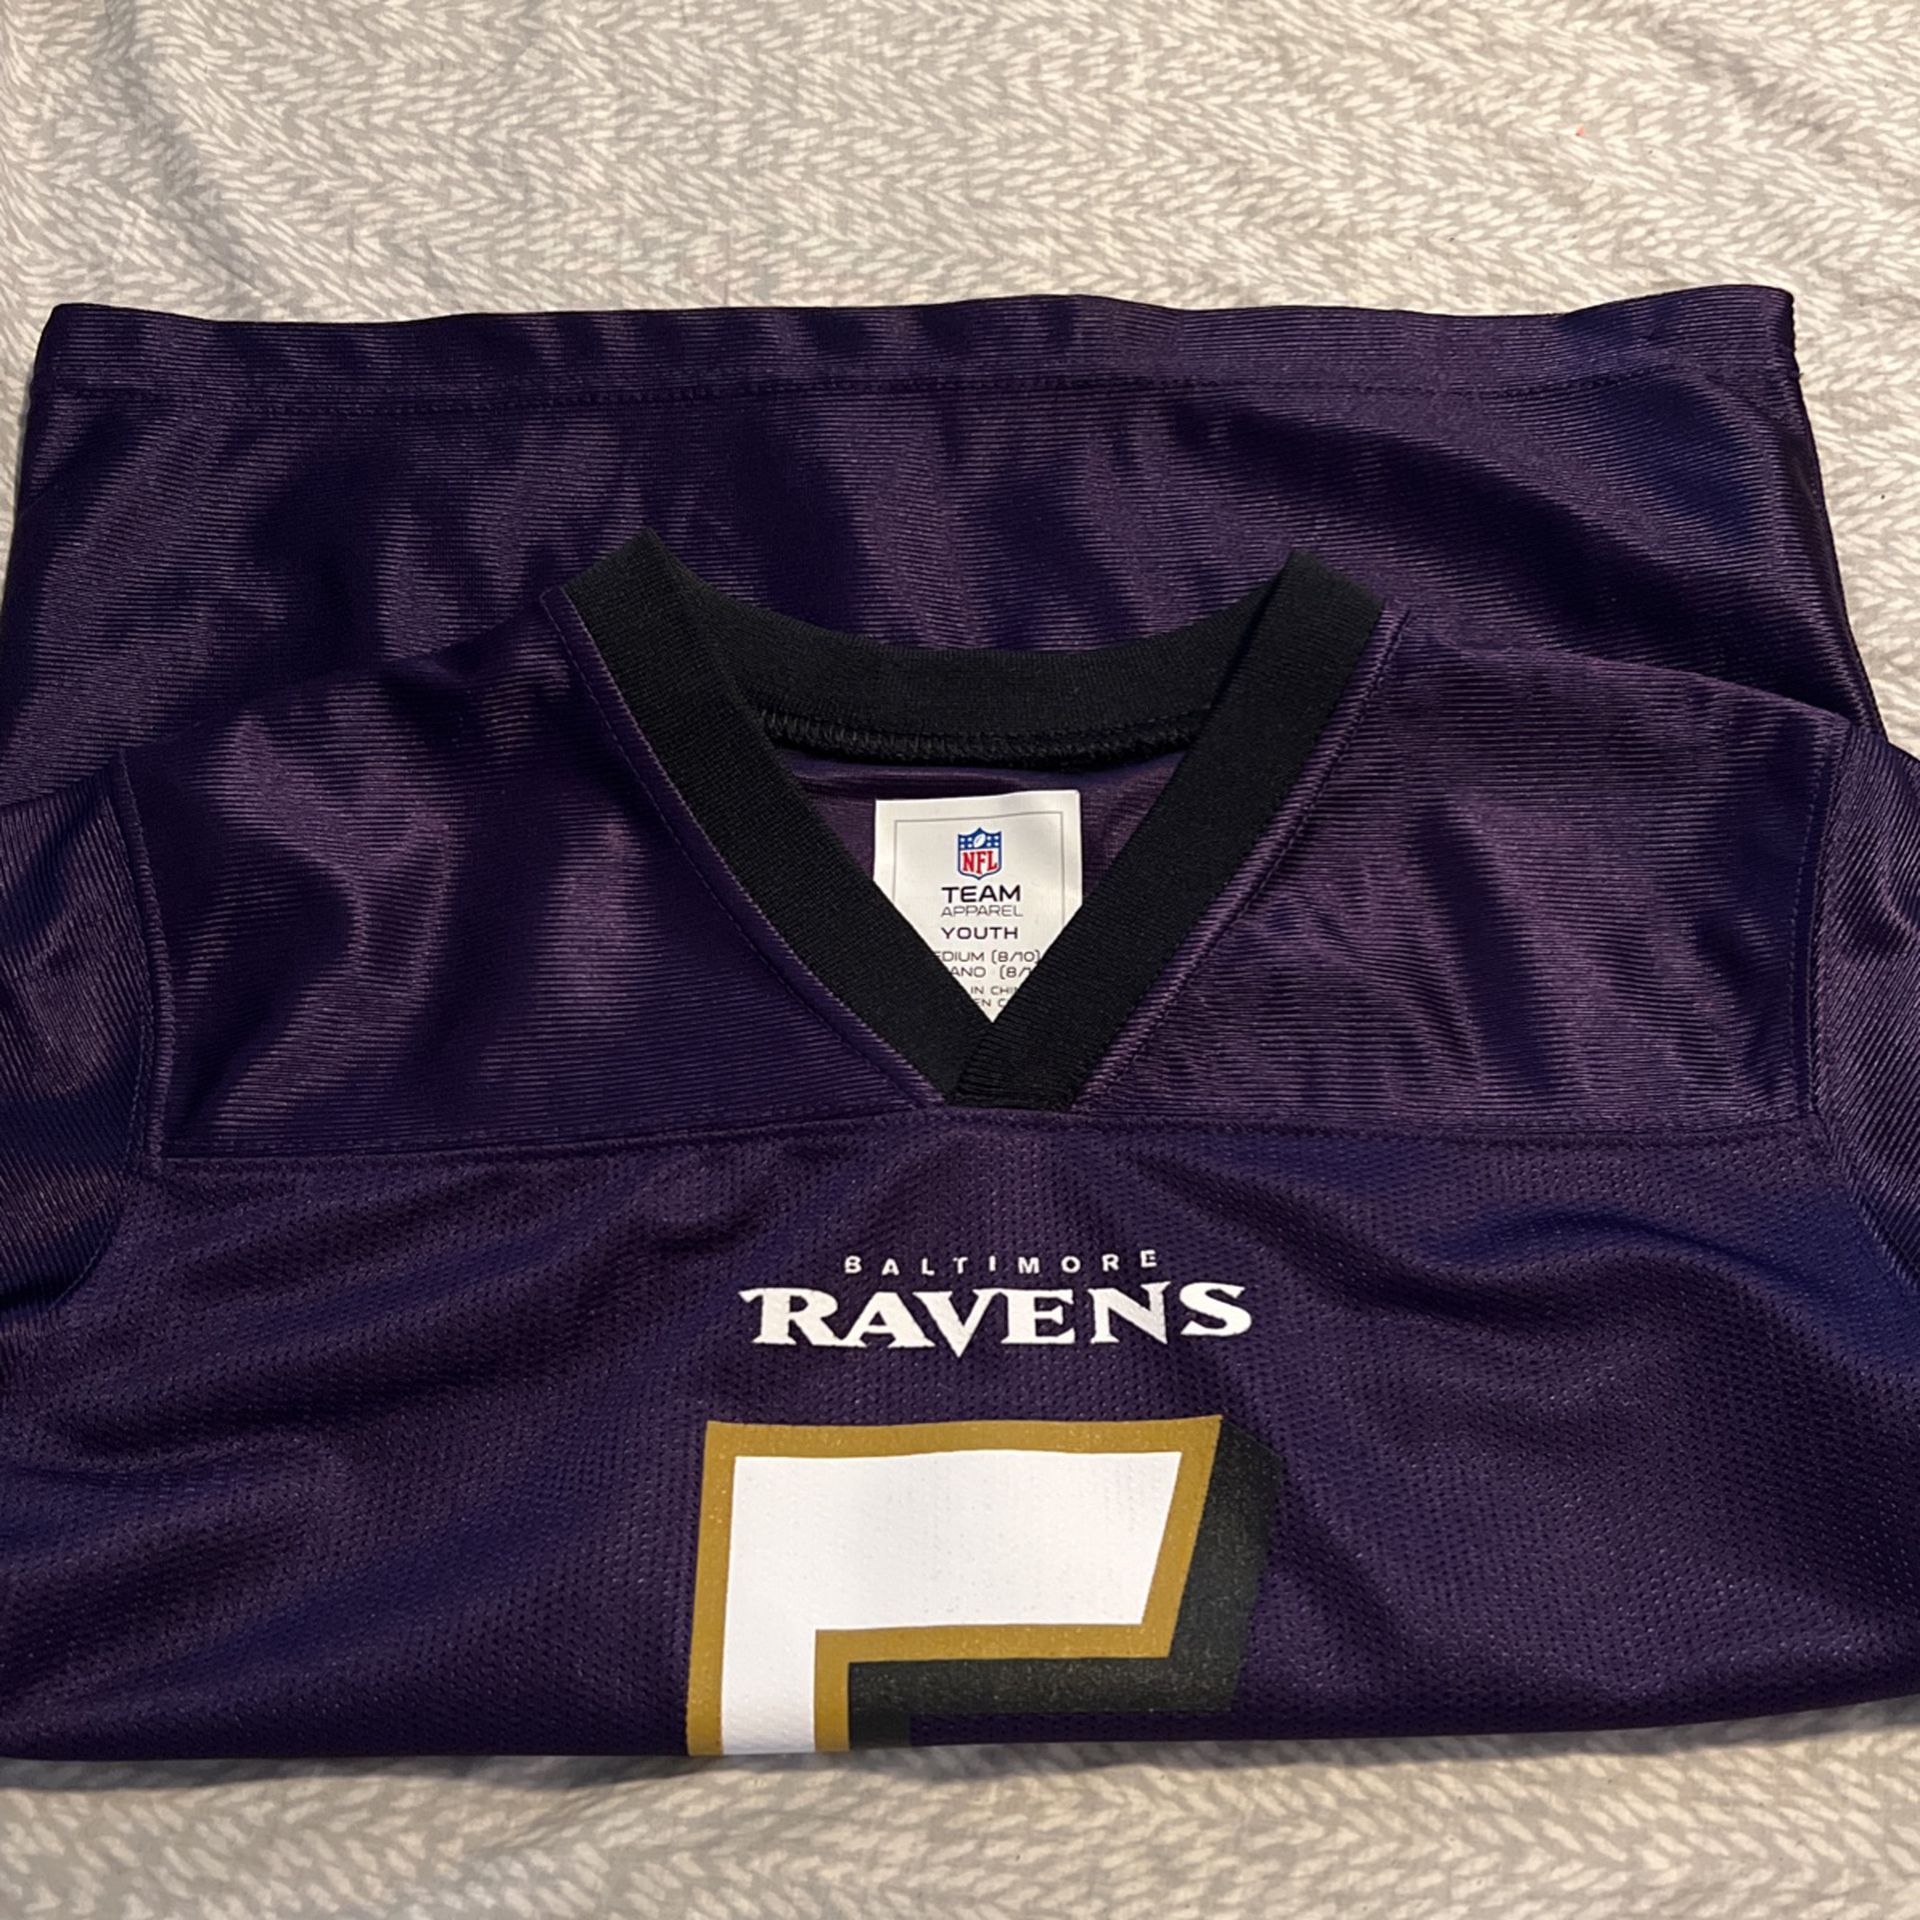 Raven’s Jersey Brand New Youth 8/10 NFL Authentic 